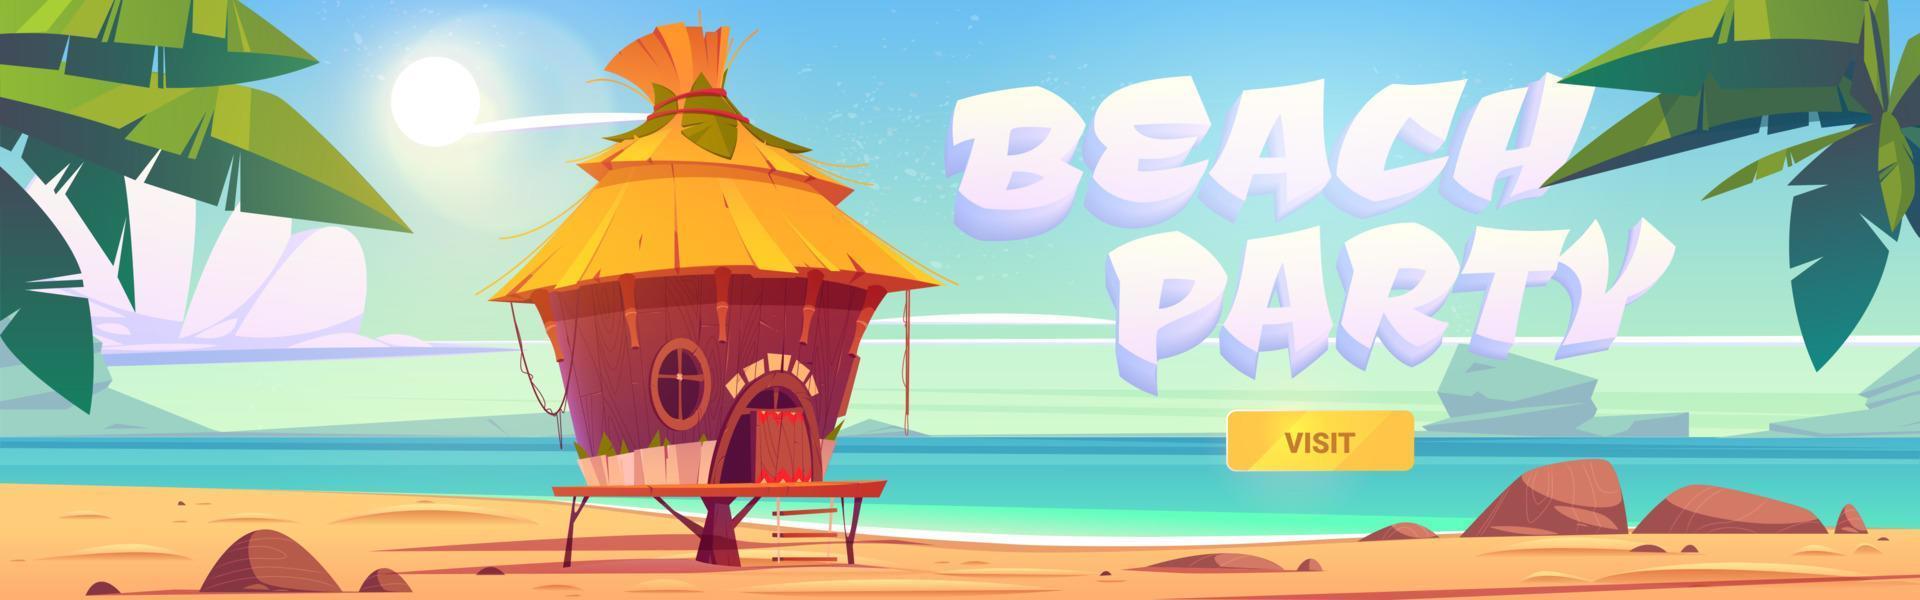 Beach party landing page with sea and bungalow vector